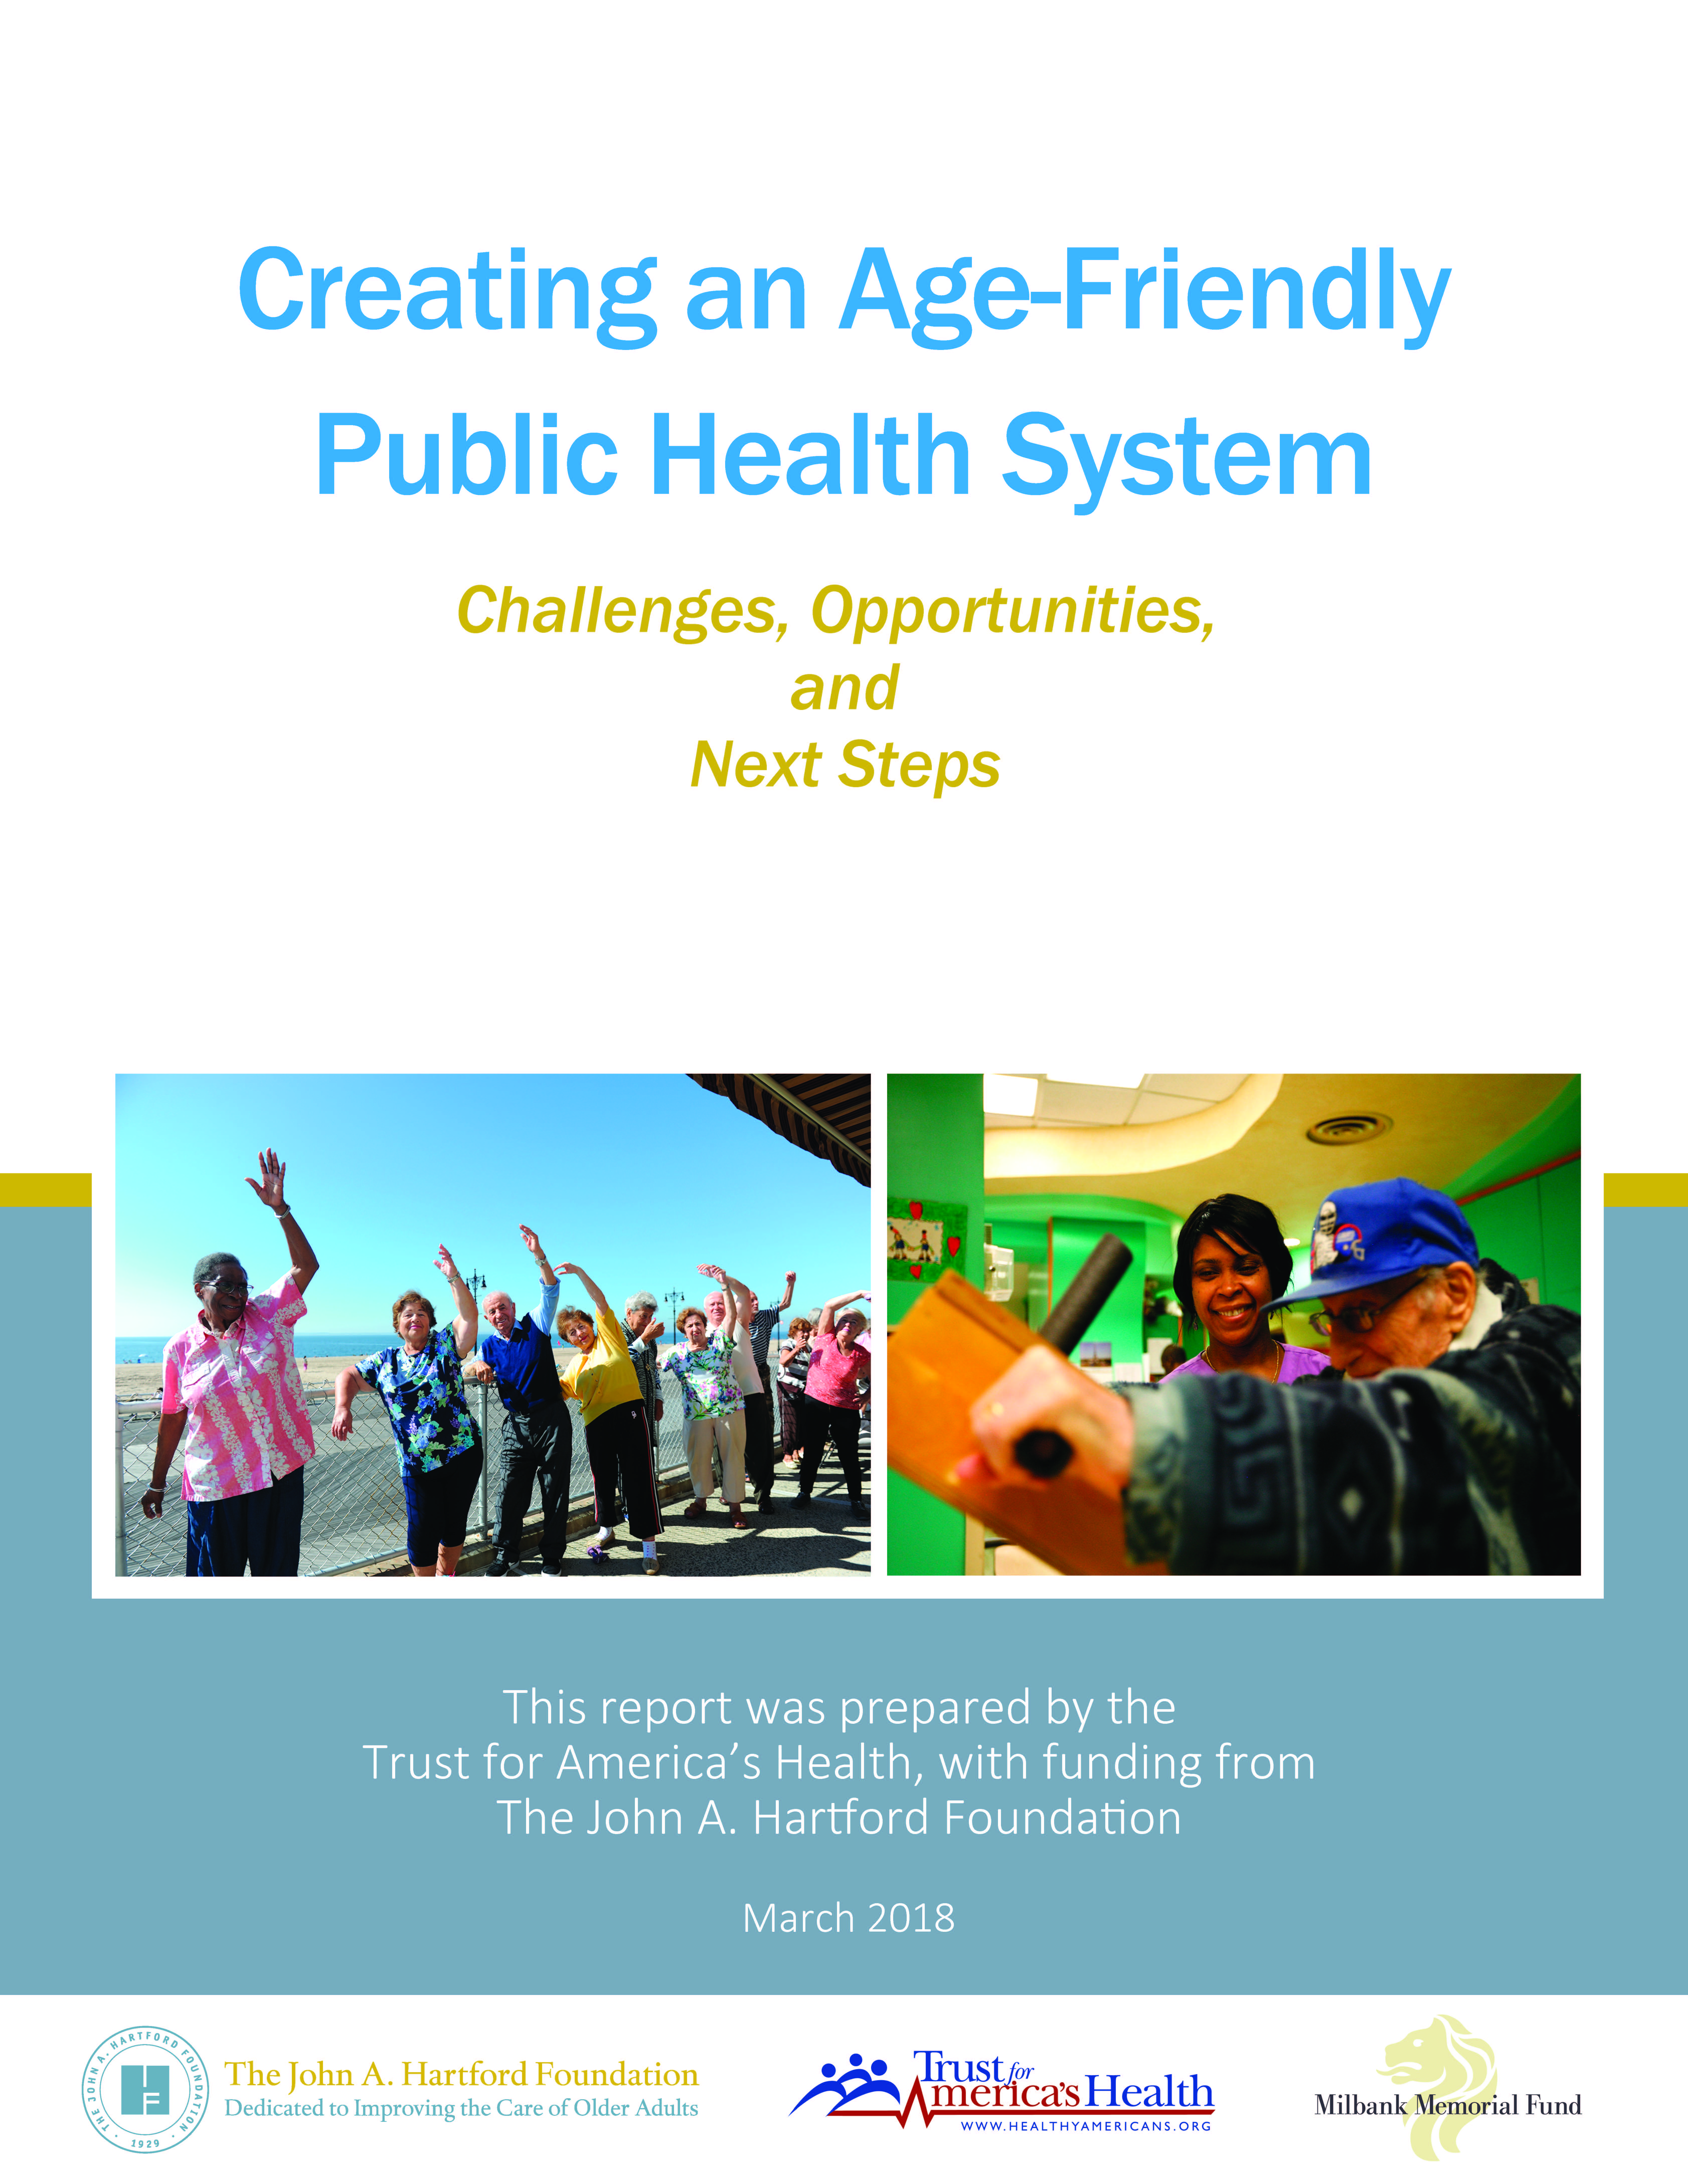 Creating An Age-Friendly Public Health System: Challenges, Opportunities, and Next Steps